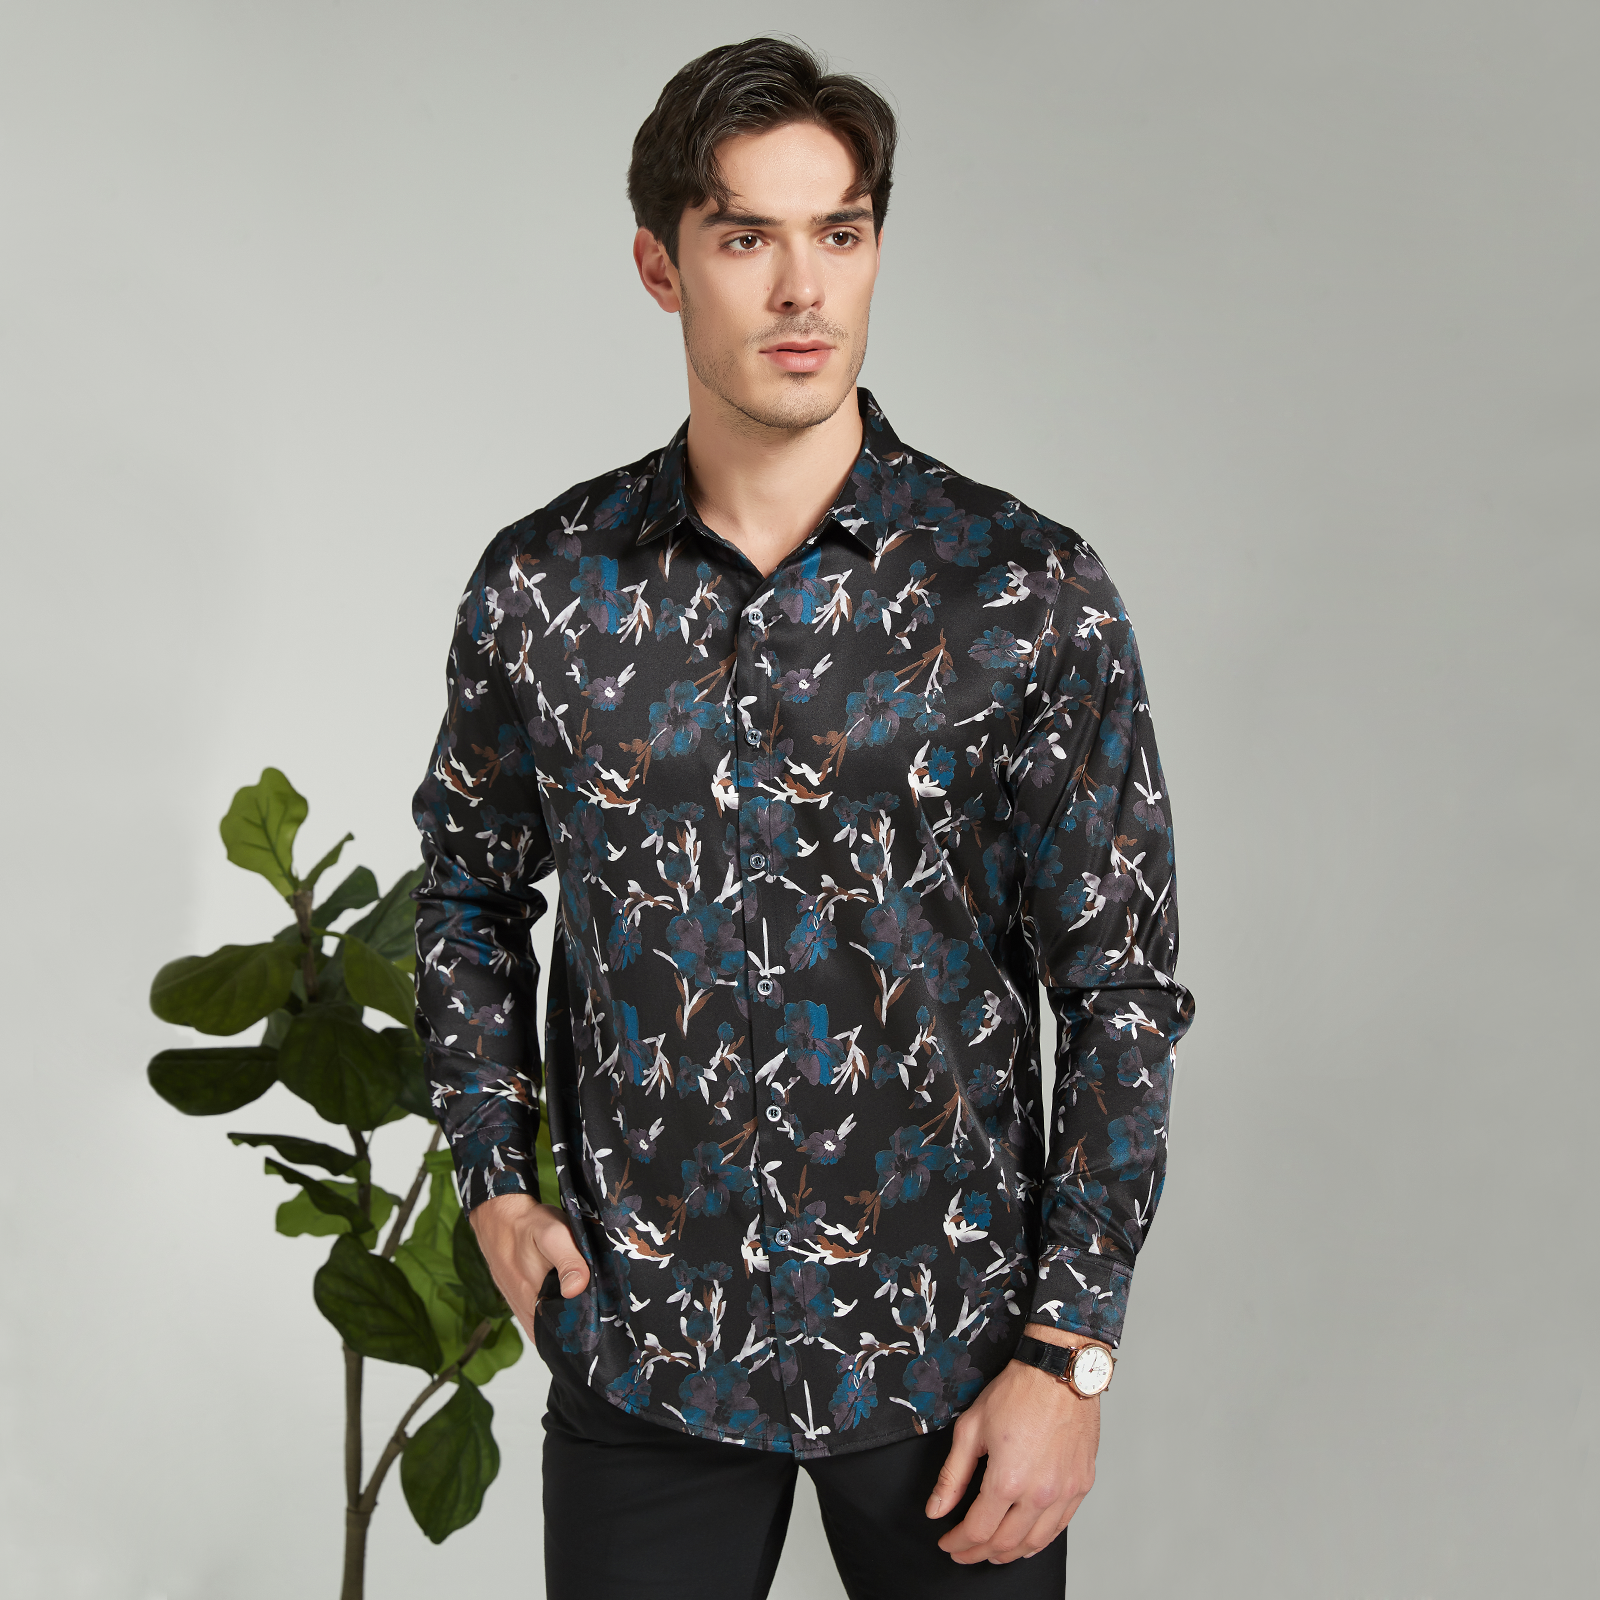 No-Iron Wrinkle-Free Froral Men's Silk Shirt Long Sleeves REAL SILK LIFE